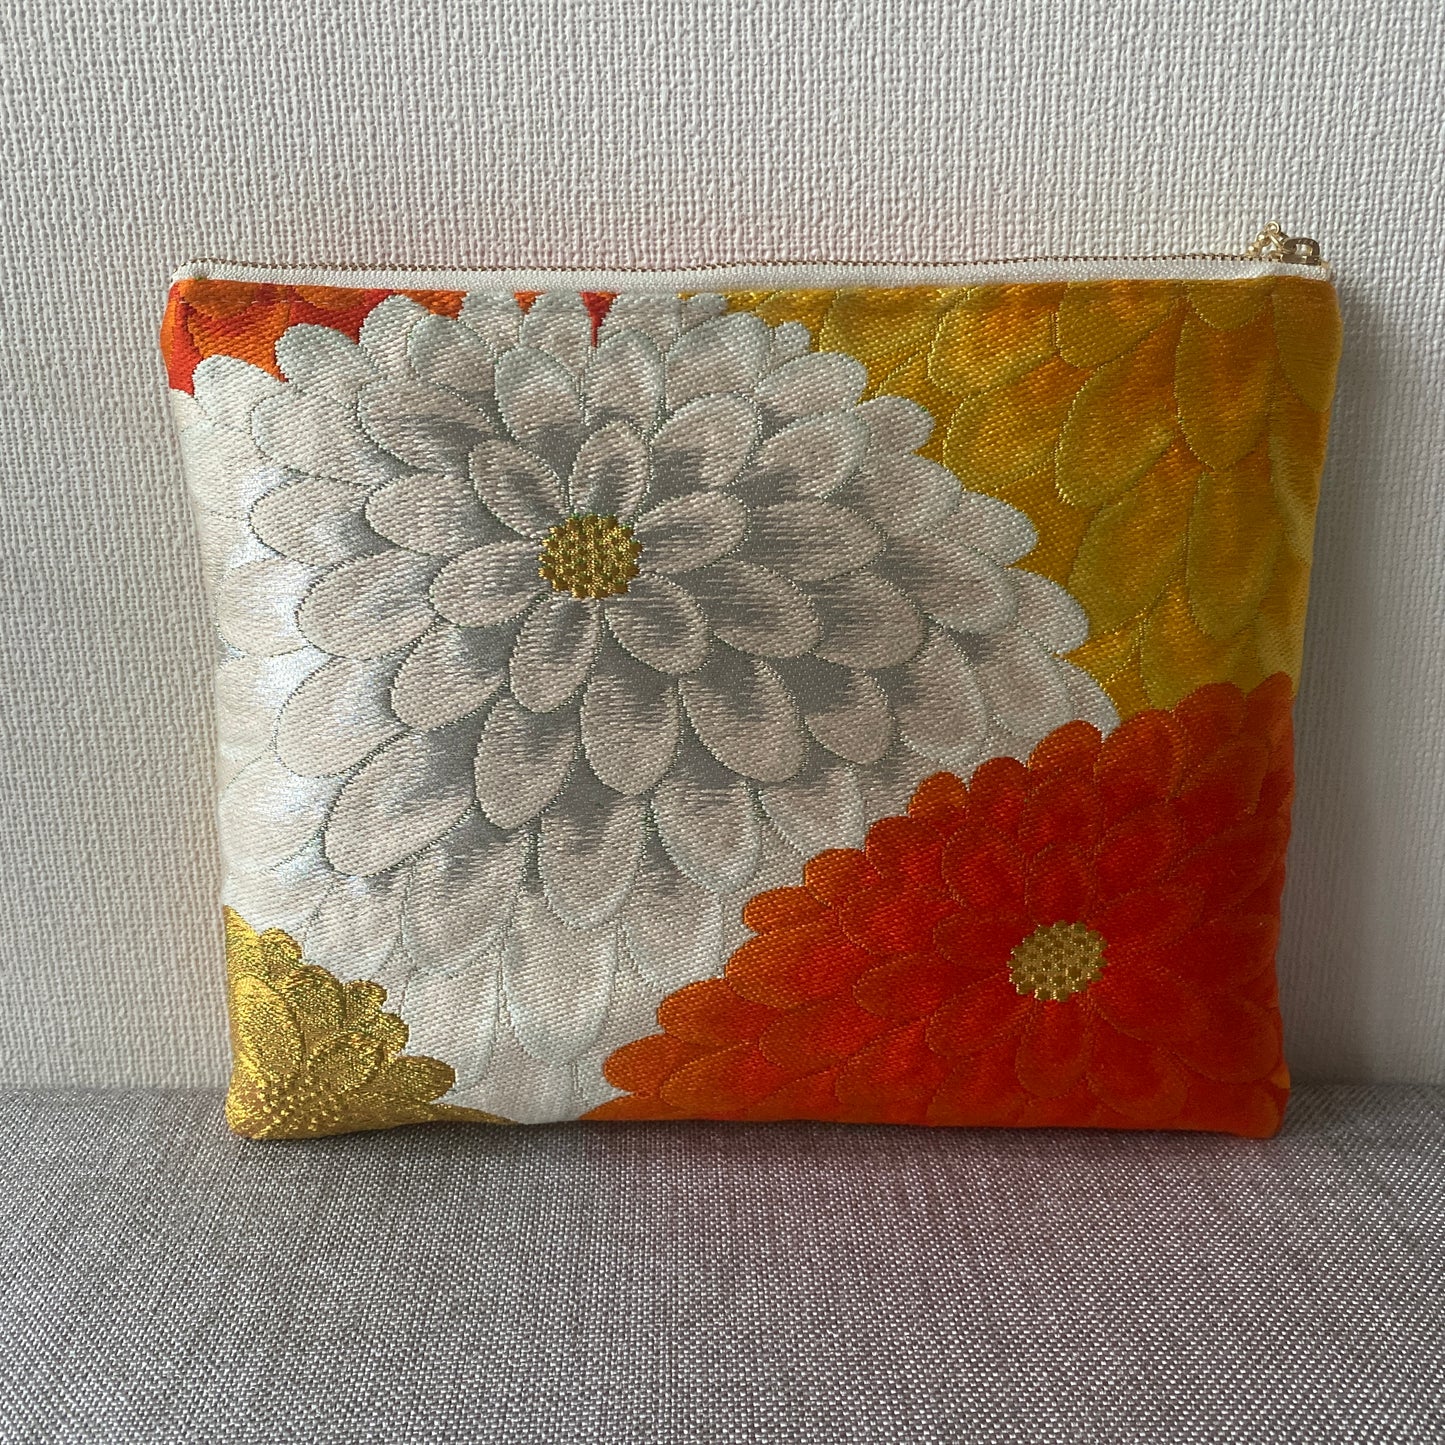 Flat silk Obi pouch, Medium size, Handcrafted, Upcycled